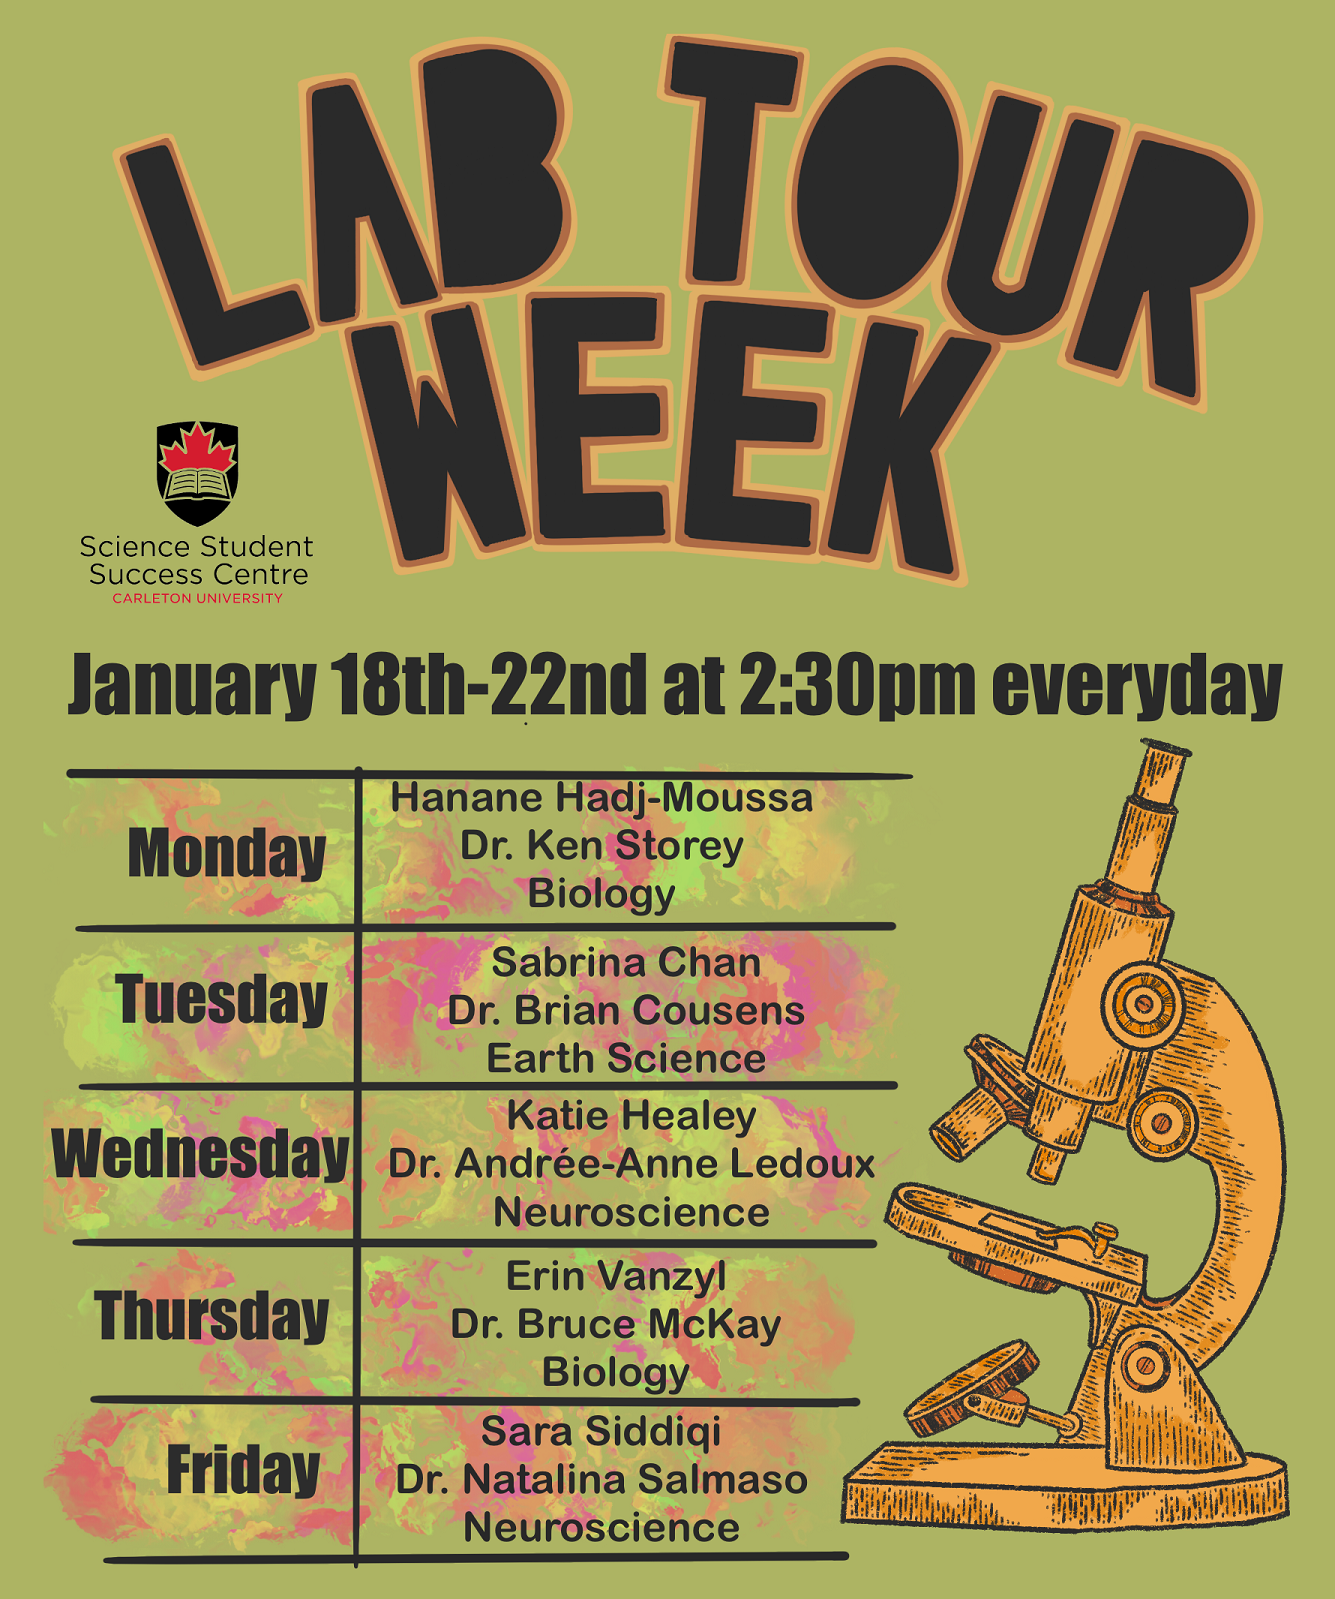 Poster for Science Lab Tour Week